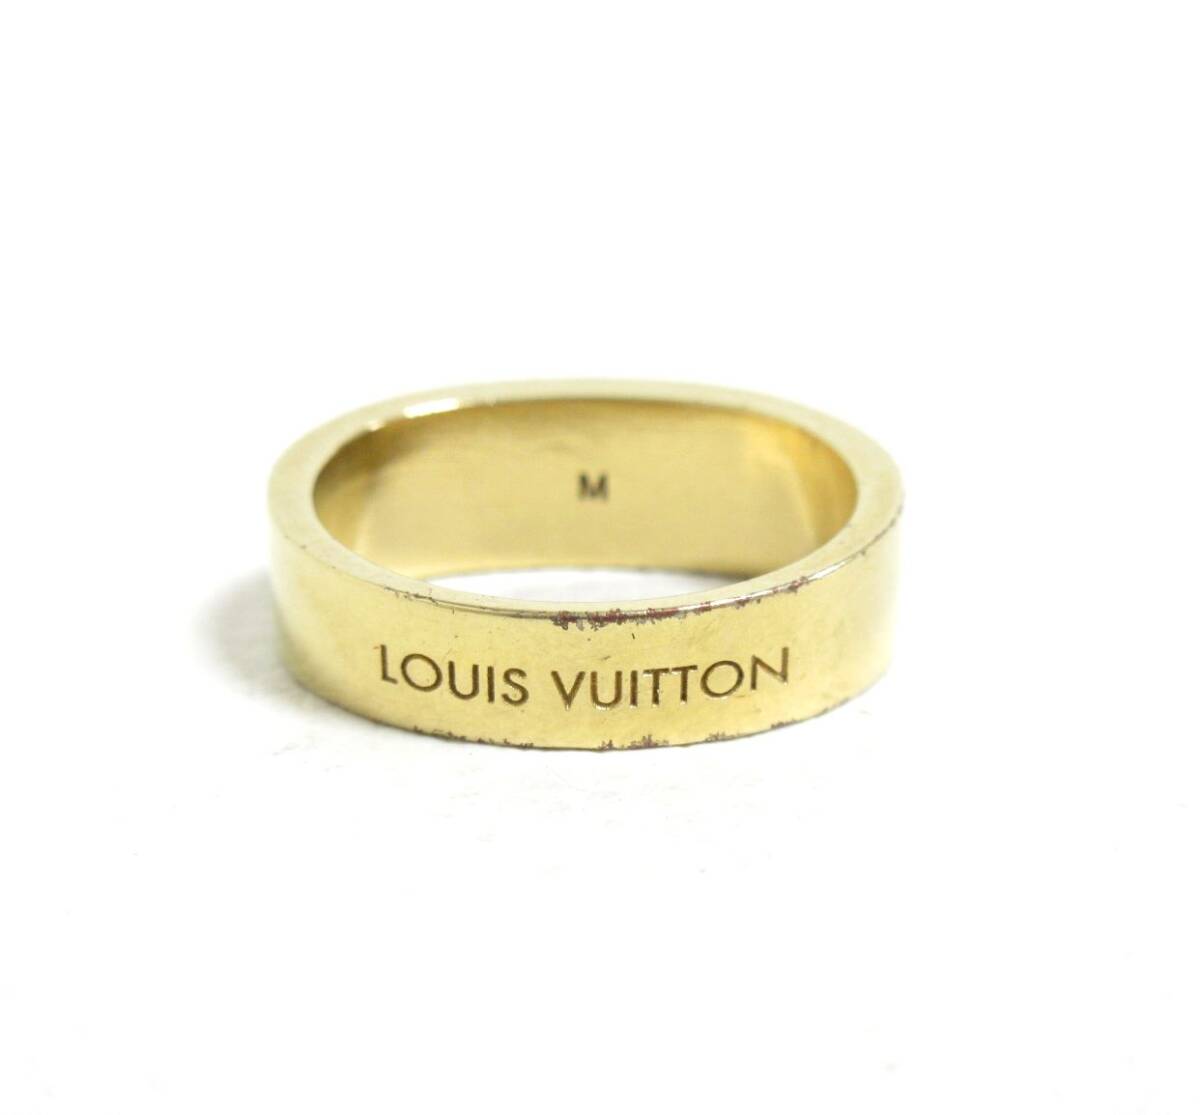 12690◆【SALE】LOUIS VUITTON ルイヴィトン M66421 バーグ ギミア リング/指輪【LE0112】M/約12号 MADE IN ITALY 中古 USED_画像3